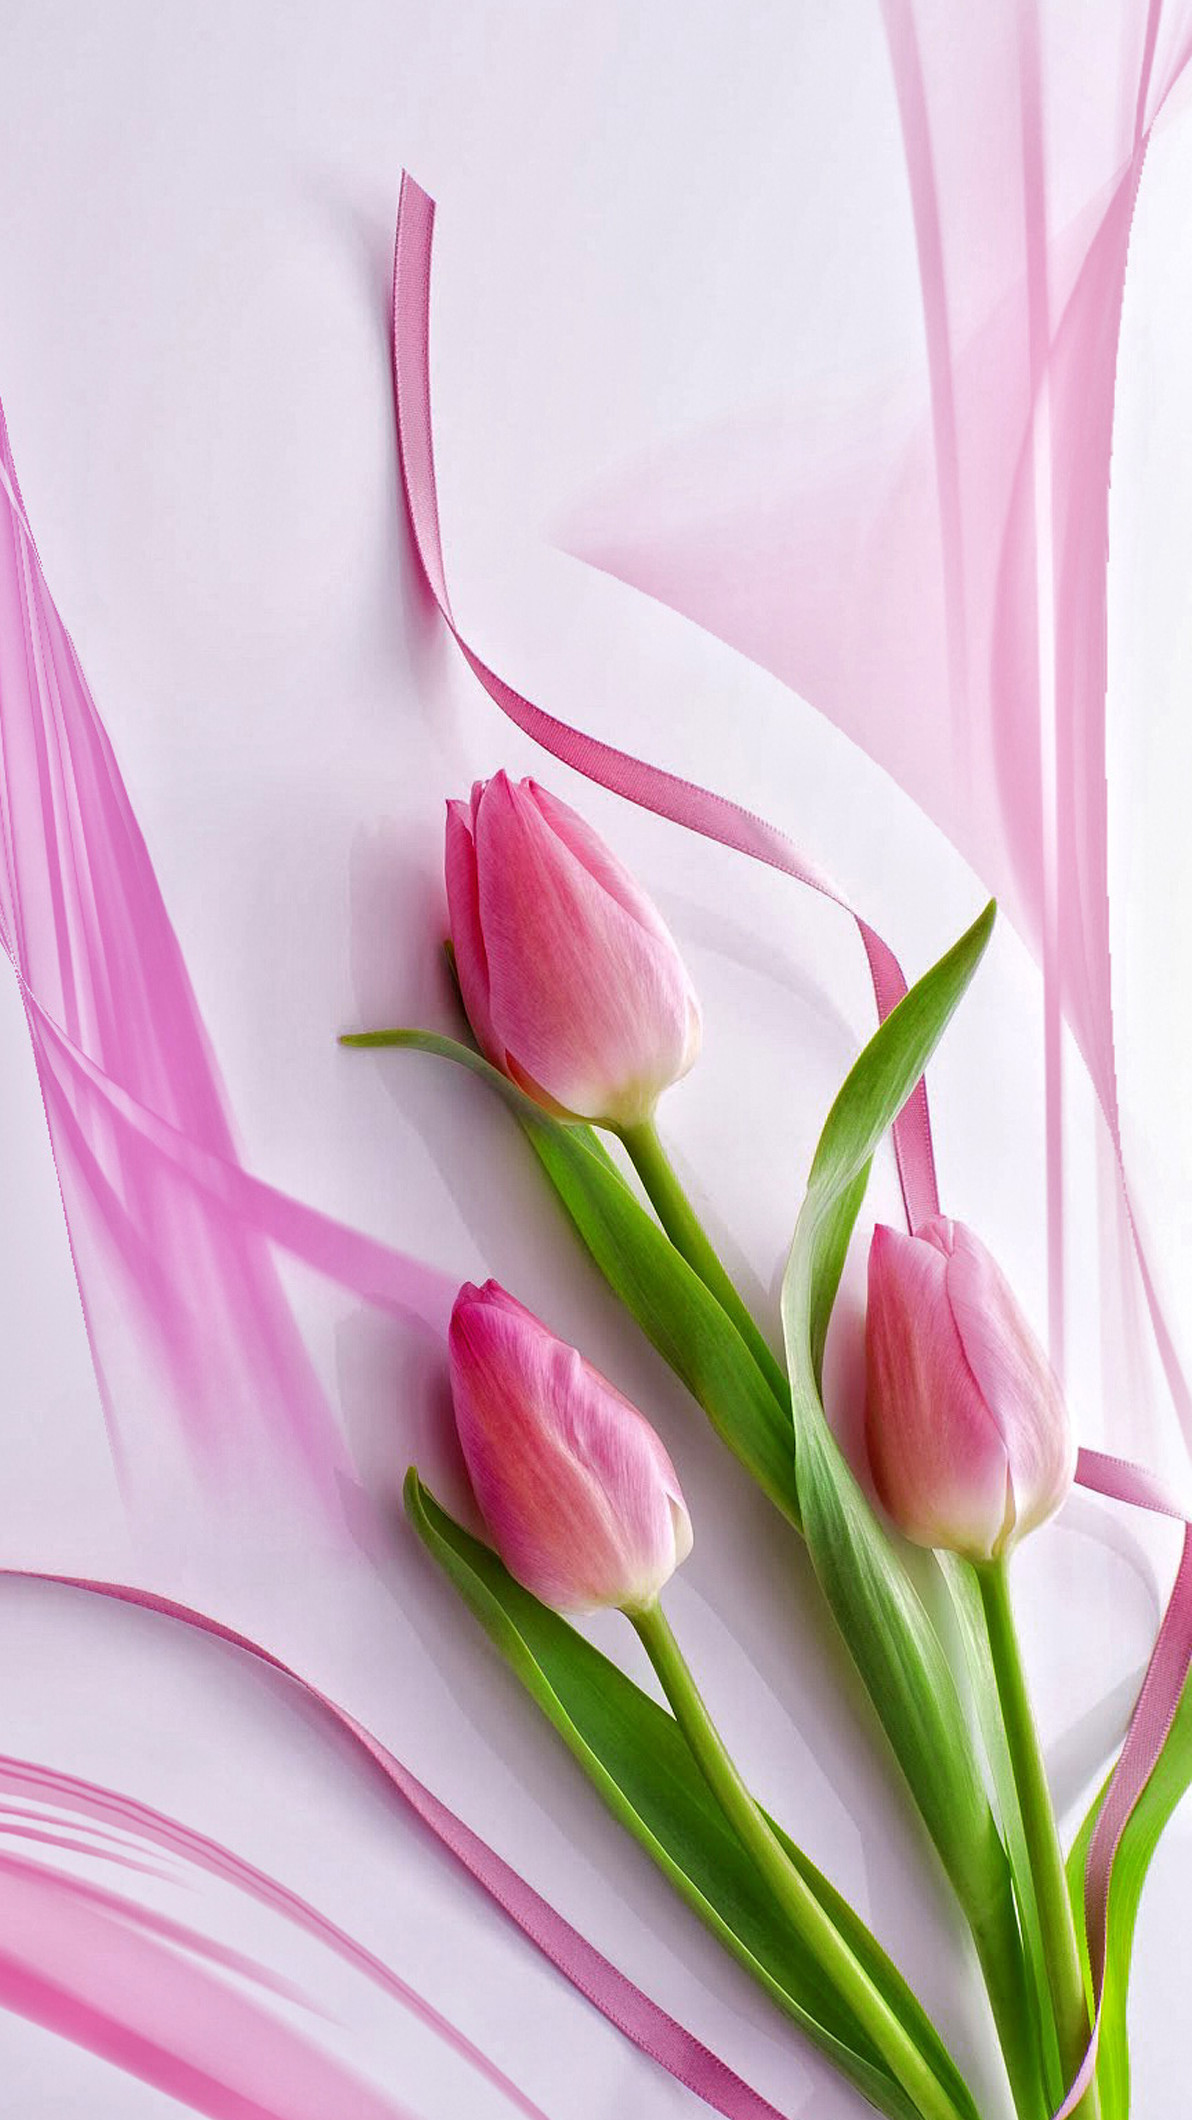 1192x2120 Cute Pink Tulips iPhone 6+ Wallpaper - http://helpyourselfimages.com/